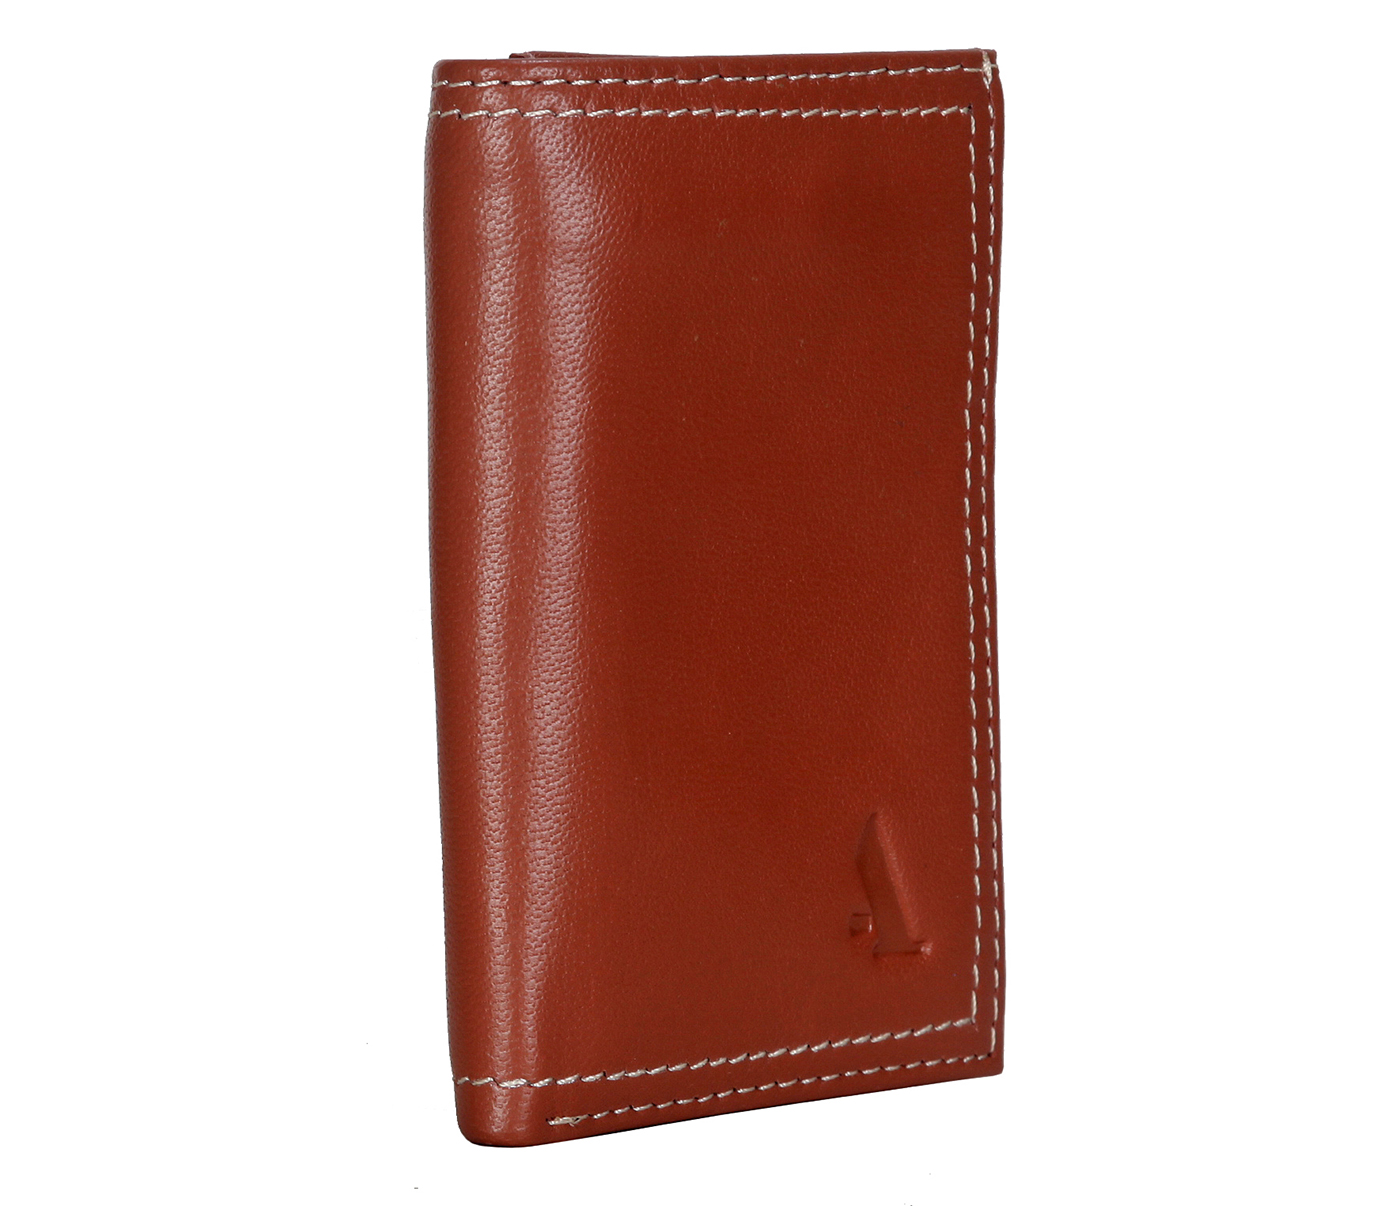 W282-Samuel-Mens's trifold wallet with photo id in Genuine Leather - Tan